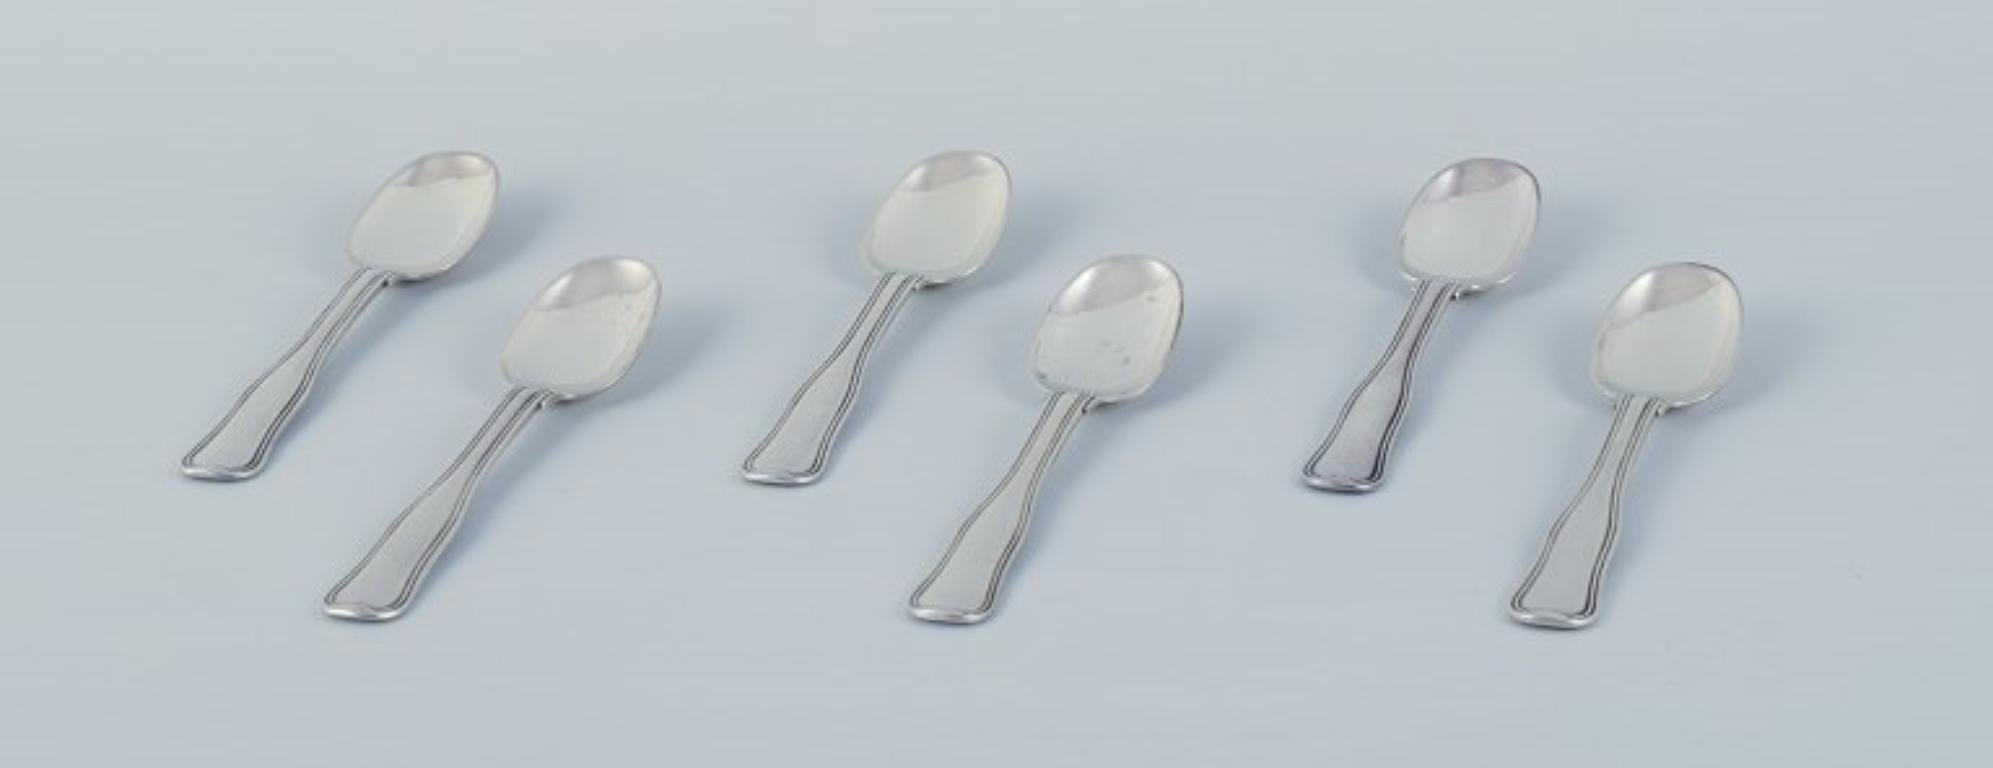 Georg Jensen Old Danish, a set of six teaspoons in sterling silver.
Stamped with post-1944 hallmark.
In excellent condition.
Measurement: L 12.8 cm.